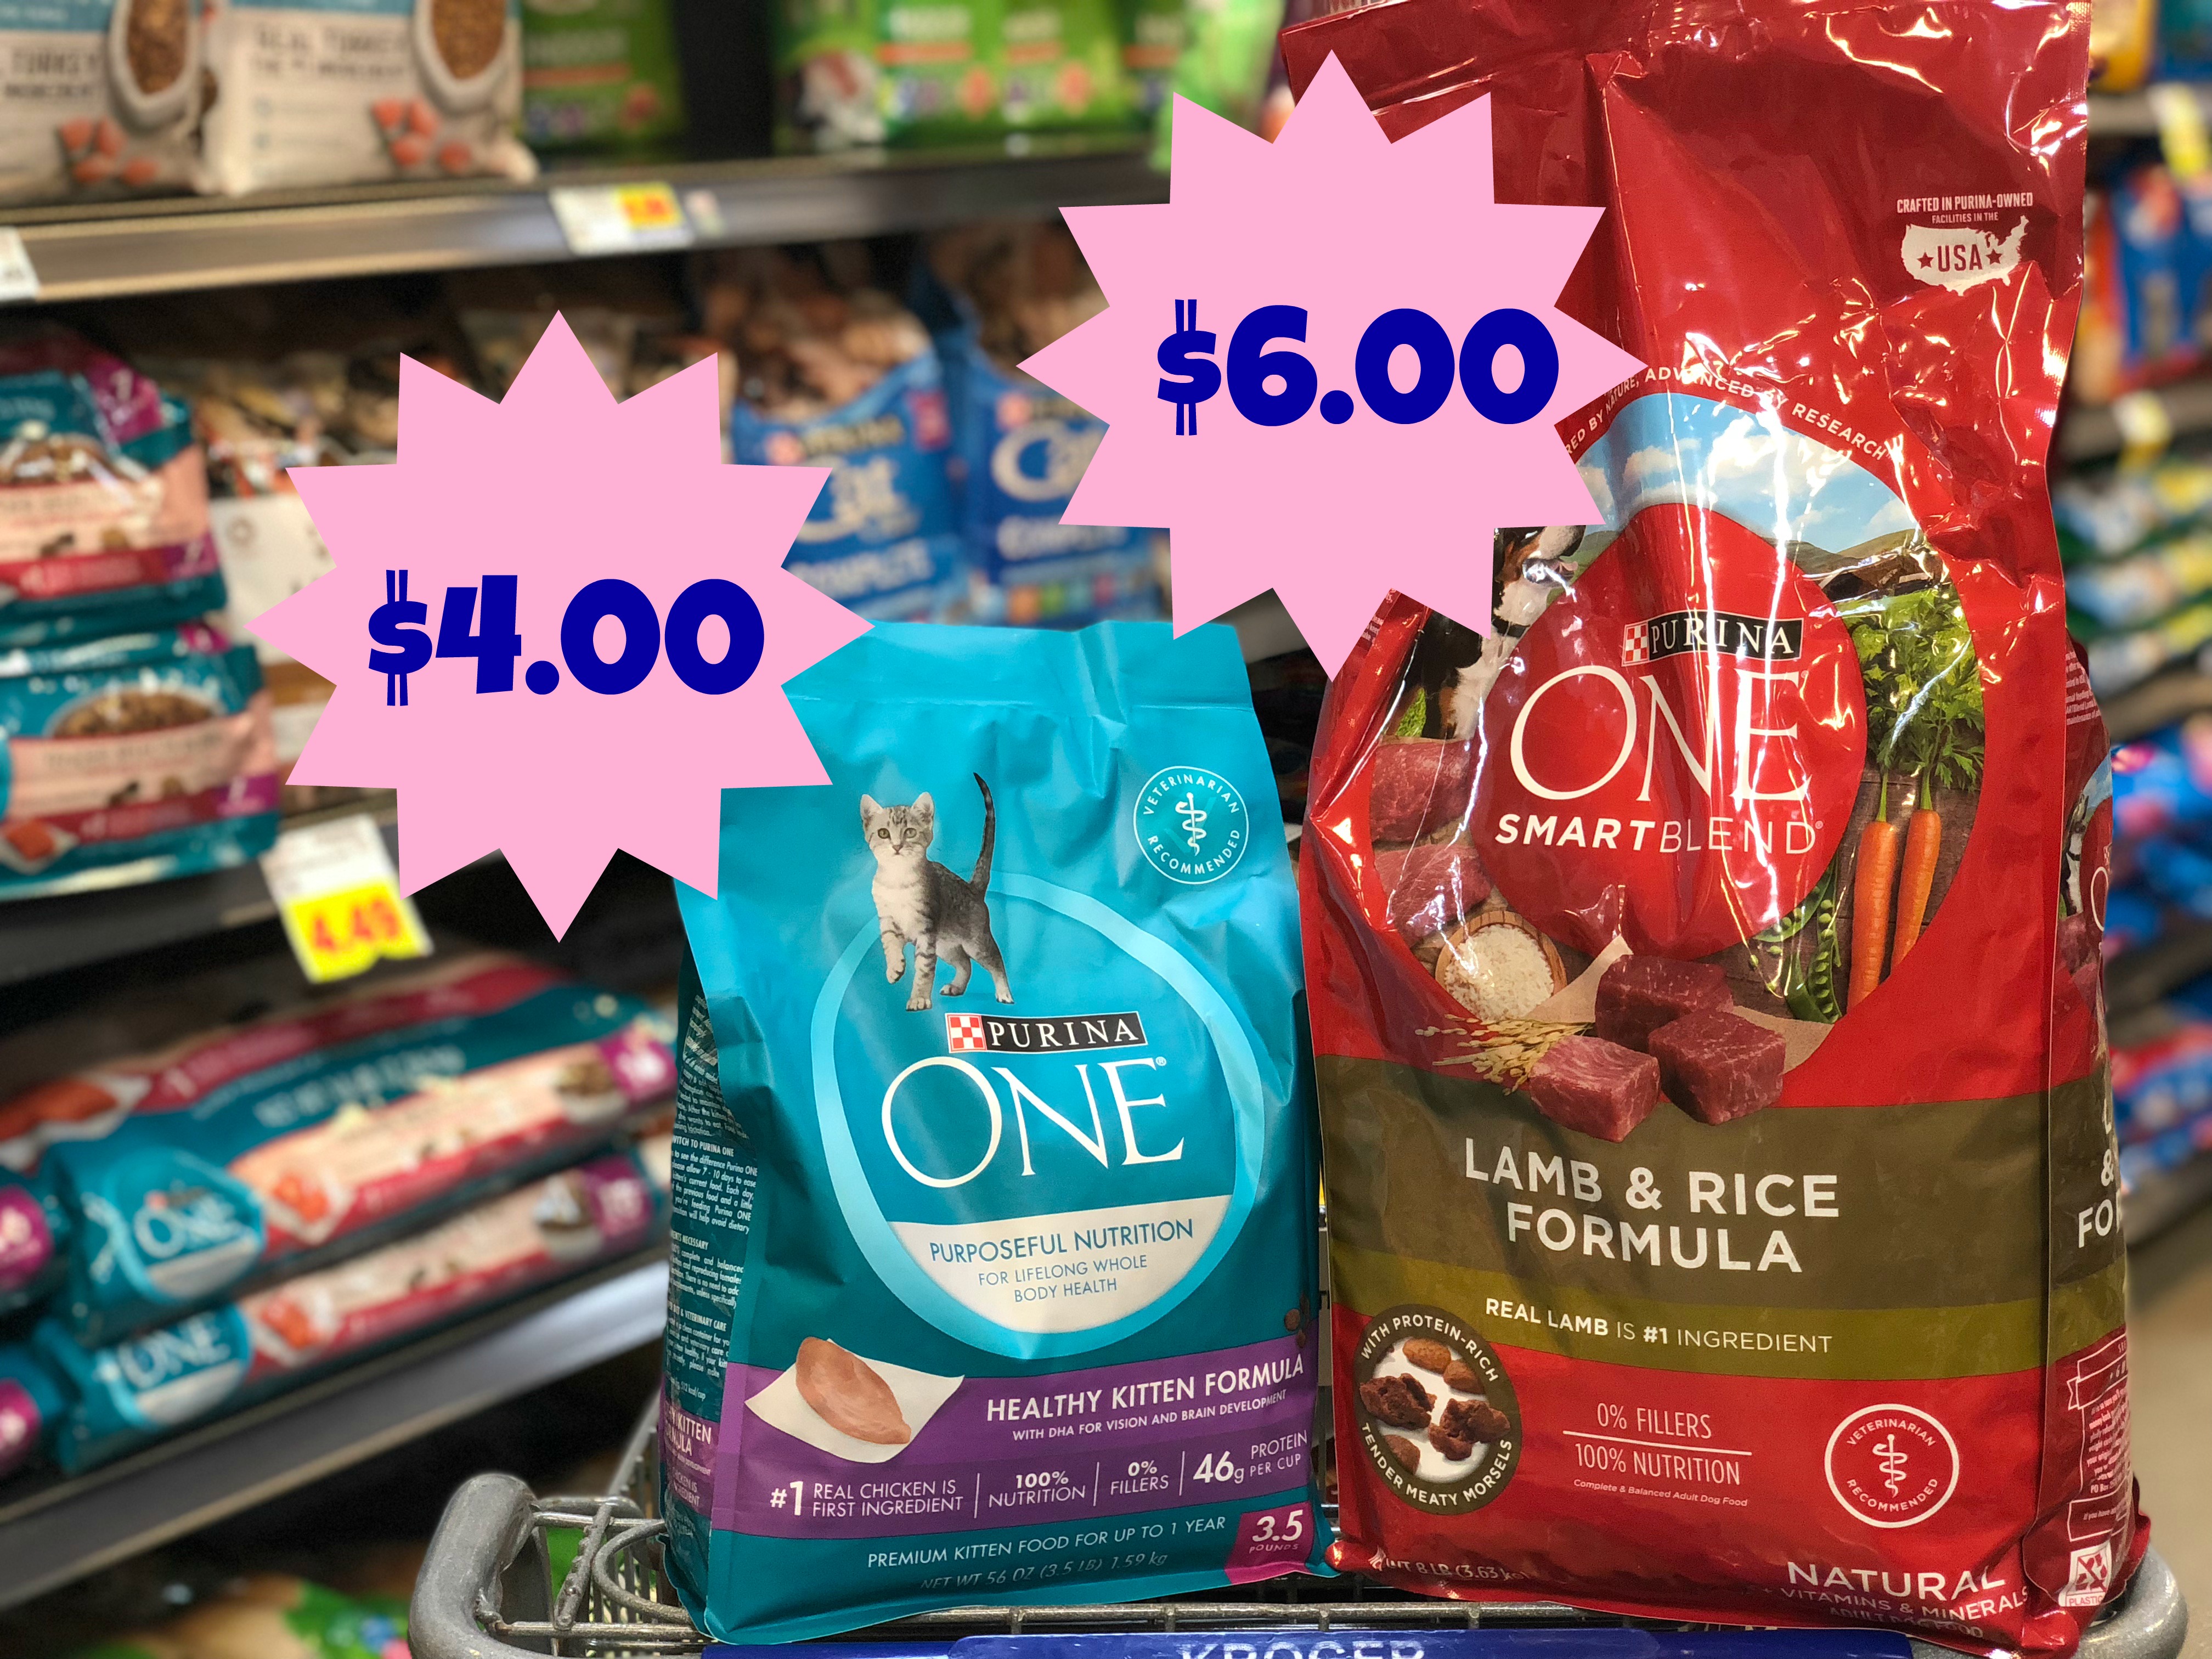 New Purina One Coupons Dry Cat Food 4 00 And Dry Dog Food 6 00 Kroger Krazy